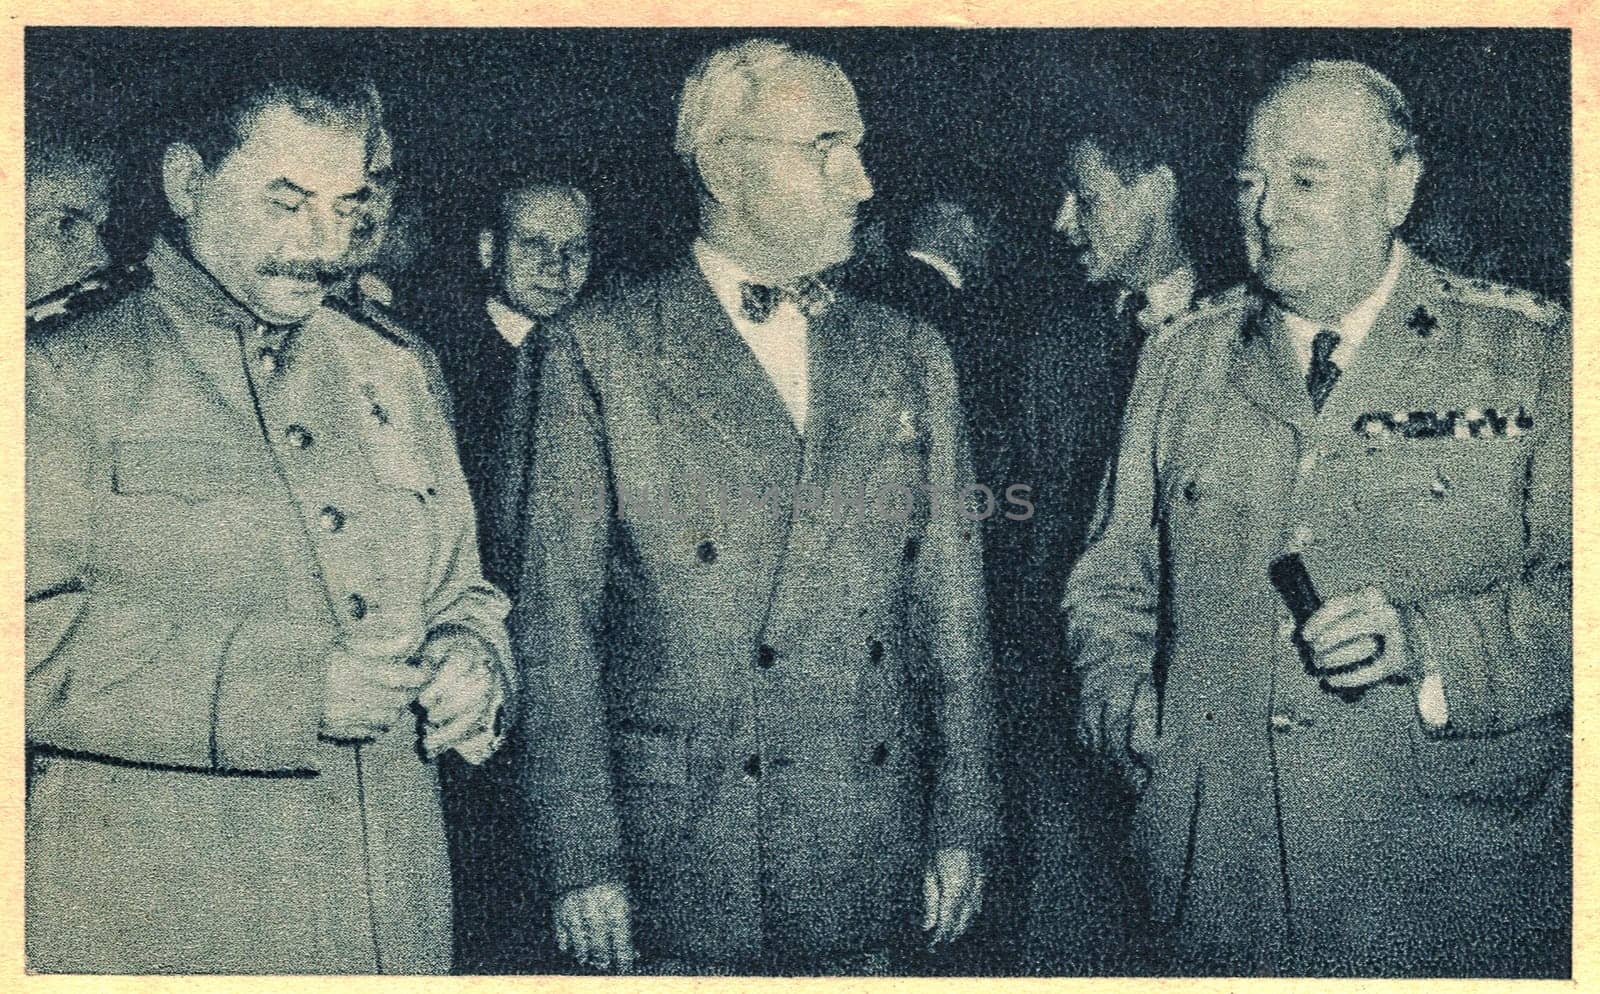 The Potsdam Conference was held in Potsdam, Germany, from July 17 to August 2, 1945. In some older documents, it is also referred to as the Berlin Conference of the Three Heads of Government of the USSR, the USA, and the UK. Joseph Stalin, Harry Truman and Winston Churchill during the Potsdam Conference. by roman_nerud